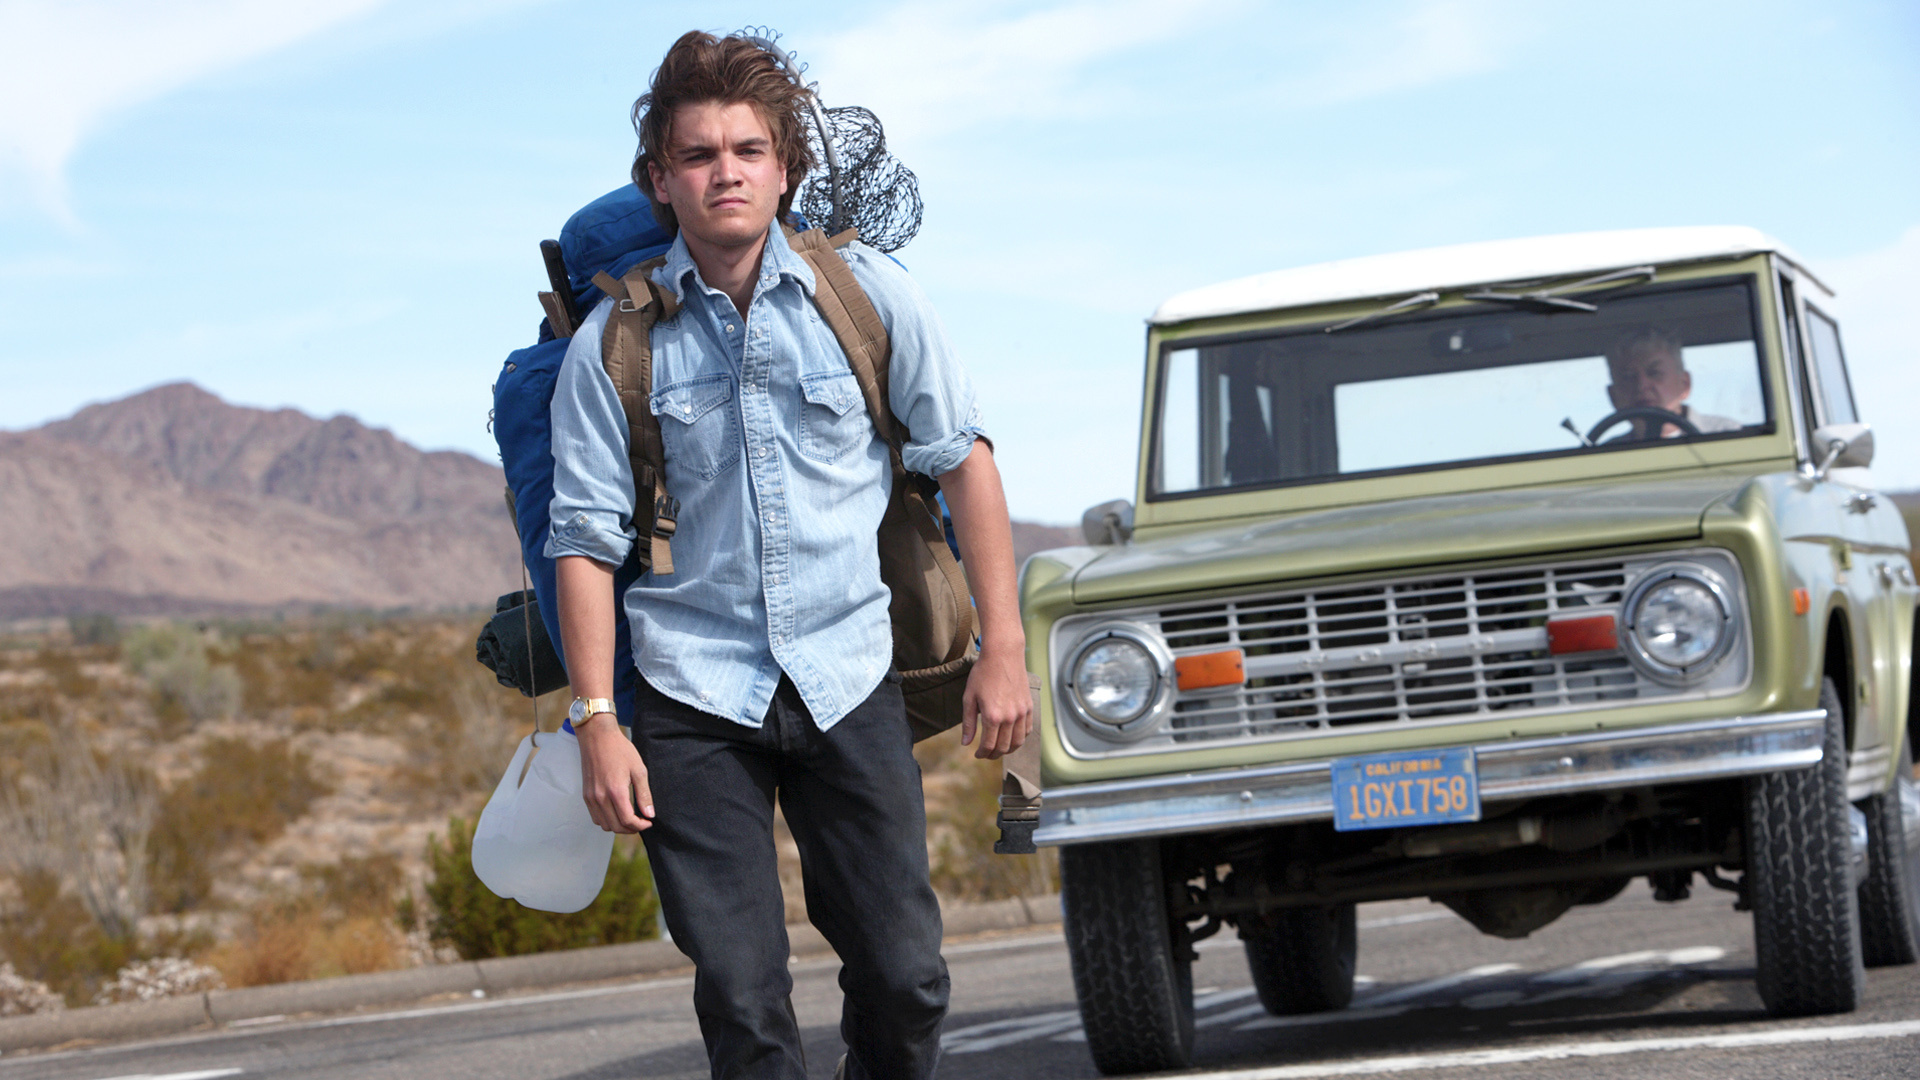 Into the Wild, Soul-searching journey, Wilderness exploration, Emile Hirsch portrayal, 1920x1080 Full HD Desktop